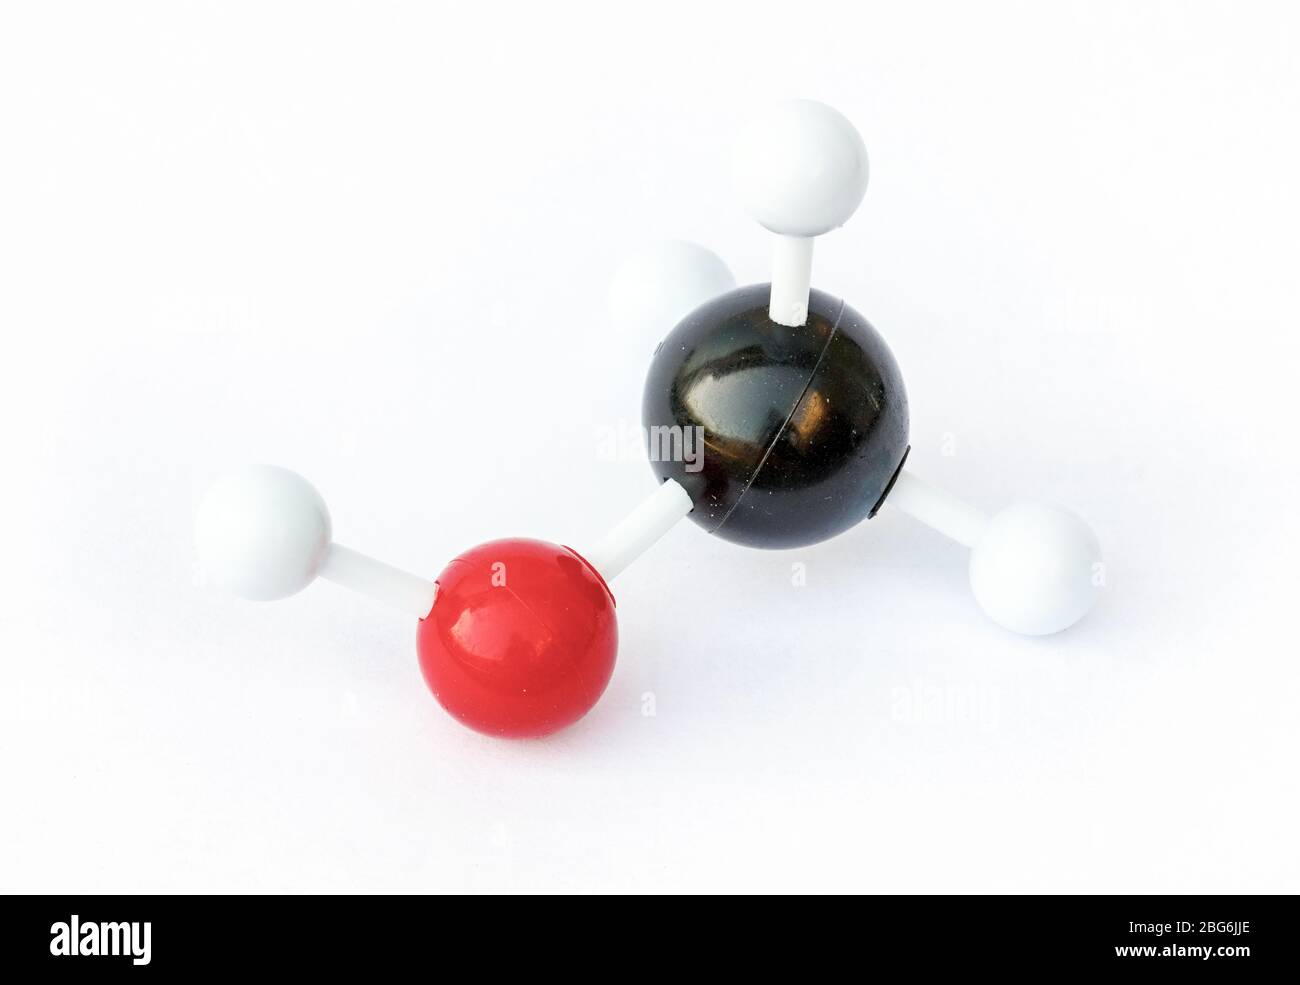 Plastic ball-and-stick model of a methanol molecule (chemical formula CH3OH) on a white background. Methanol is highly toxic and commonly serves as a Stock Photo